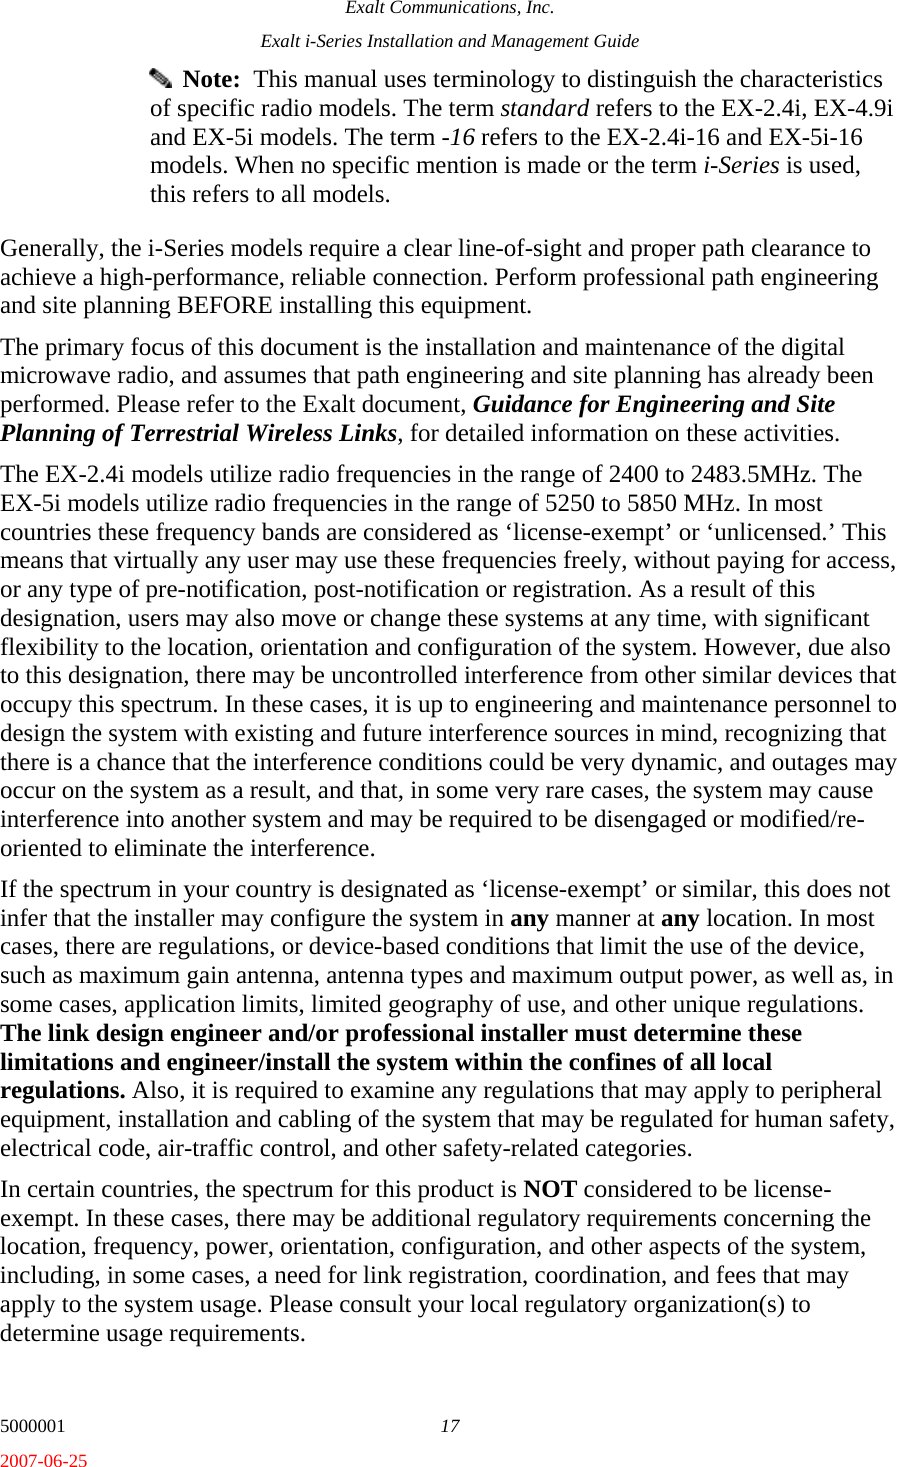 Exalt Communications, Inc. Exalt i-Series Installation and Management Guide 5000001  17 2007-06-25   Note:  This manual uses terminology to distinguish the characteristics of specific radio models. The term standard refers to the EX-2.4i, EX-4.9i and EX-5i models. The term -16 refers to the EX-2.4i-16 and EX-5i-16 models. When no specific mention is made or the term i-Series is used, this refers to all models. Generally, the i-Series models require a clear line-of-sight and proper path clearance to achieve a high-performance, reliable connection. Perform professional path engineering and site planning BEFORE installing this equipment.  The primary focus of this document is the installation and maintenance of the digital microwave radio, and assumes that path engineering and site planning has already been performed. Please refer to the Exalt document, Guidance for Engineering and Site Planning of Terrestrial Wireless Links, for detailed information on these activities. The EX-2.4i models utilize radio frequencies in the range of 2400 to 2483.5MHz. The EX-5i models utilize radio frequencies in the range of 5250 to 5850 MHz. In most countries these frequency bands are considered as ‘license-exempt’ or ‘unlicensed.’ This means that virtually any user may use these frequencies freely, without paying for access, or any type of pre-notification, post-notification or registration. As a result of this designation, users may also move or change these systems at any time, with significant flexibility to the location, orientation and configuration of the system. However, due also to this designation, there may be uncontrolled interference from other similar devices that occupy this spectrum. In these cases, it is up to engineering and maintenance personnel to design the system with existing and future interference sources in mind, recognizing that there is a chance that the interference conditions could be very dynamic, and outages may occur on the system as a result, and that, in some very rare cases, the system may cause interference into another system and may be required to be disengaged or modified/re-oriented to eliminate the interference. If the spectrum in your country is designated as ‘license-exempt’ or similar, this does not infer that the installer may configure the system in any manner at any location. In most cases, there are regulations, or device-based conditions that limit the use of the device, such as maximum gain antenna, antenna types and maximum output power, as well as, in some cases, application limits, limited geography of use, and other unique regulations. The link design engineer and/or professional installer must determine these limitations and engineer/install the system within the confines of all local regulations. Also, it is required to examine any regulations that may apply to peripheral equipment, installation and cabling of the system that may be regulated for human safety, electrical code, air-traffic control, and other safety-related categories. In certain countries, the spectrum for this product is NOT considered to be license-exempt. In these cases, there may be additional regulatory requirements concerning the location, frequency, power, orientation, configuration, and other aspects of the system, including, in some cases, a need for link registration, coordination, and fees that may apply to the system usage. Please consult your local regulatory organization(s) to determine usage requirements. 